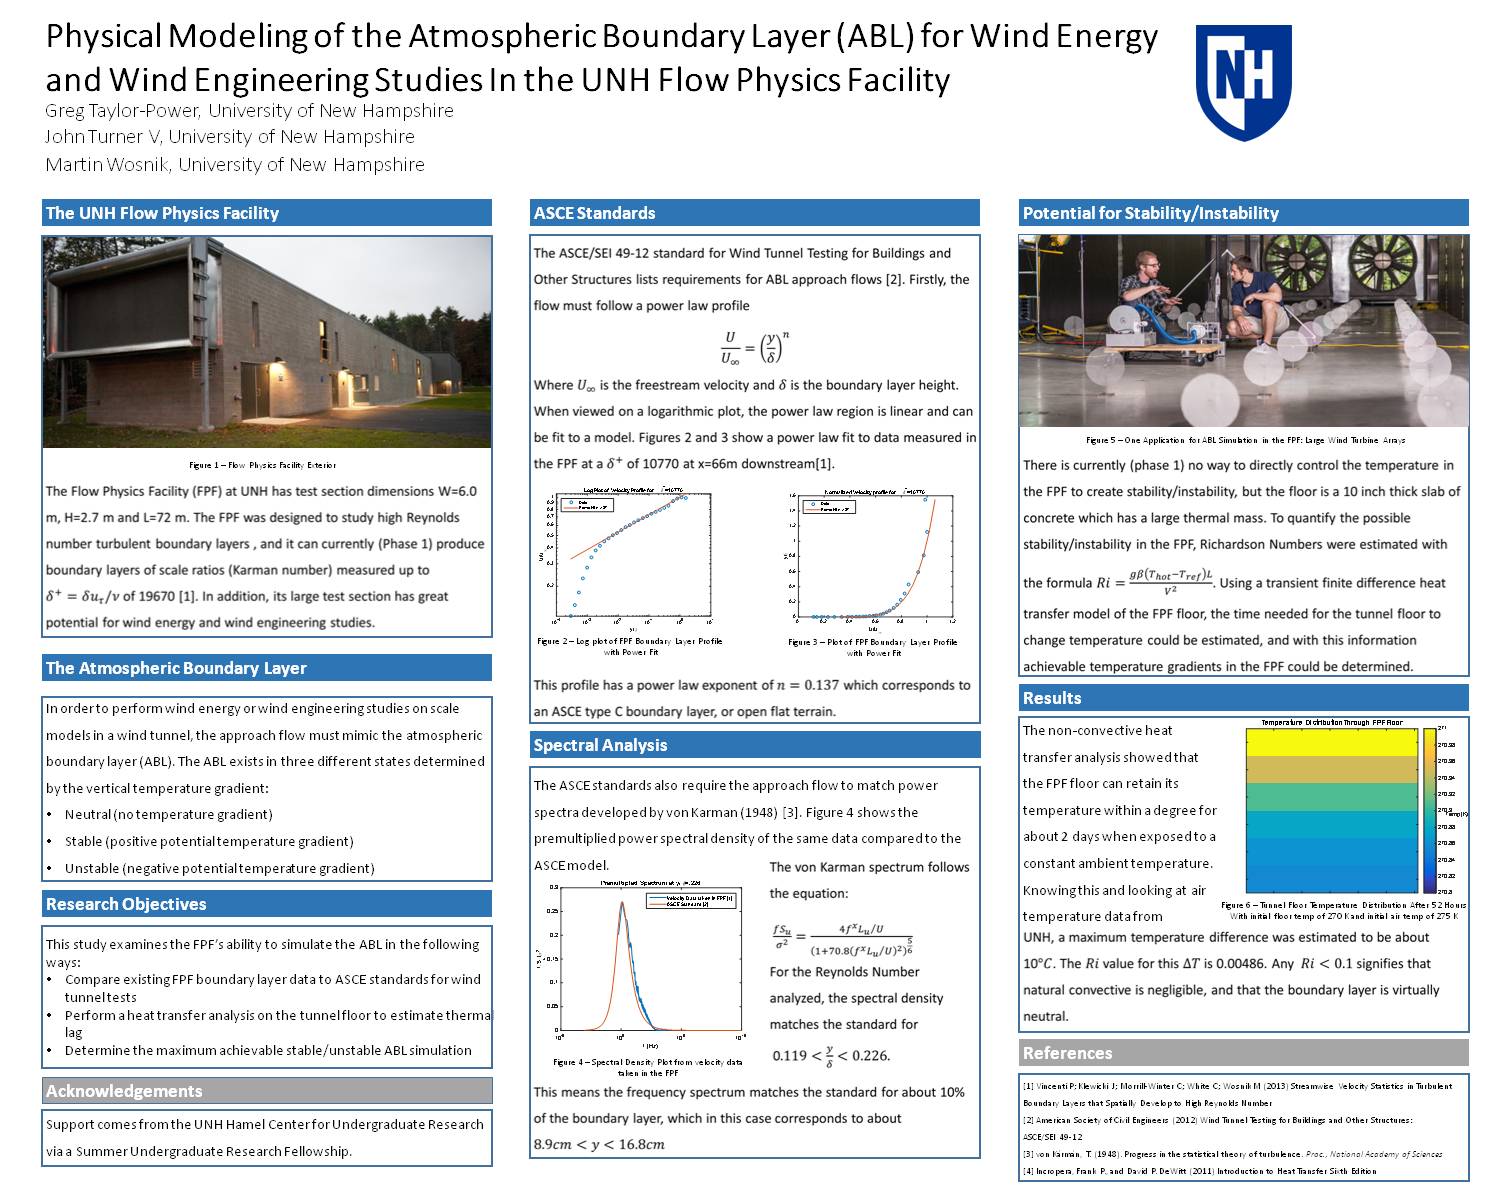 Physical Modeling Of The Atmospheric Boundary Layer (Abl) For Wind Energy  And Wind Engineering Studies In The Unh Flow Physics Facility by gga3